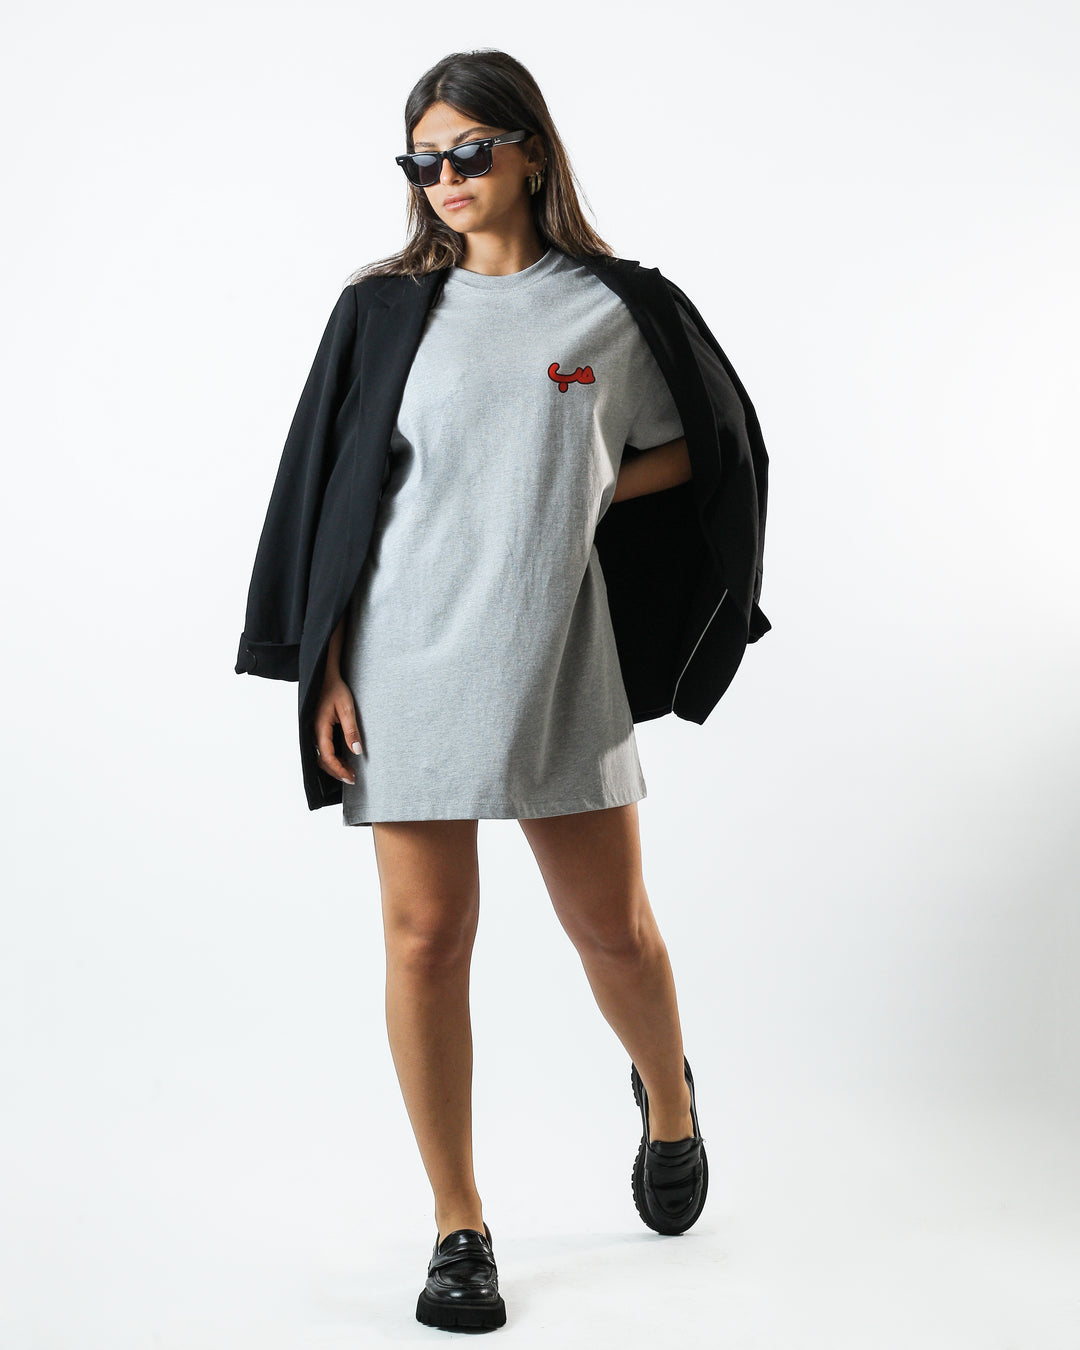 Young adult female wearing an Oversized grey T-Dress with Hobb written in Arabic حب and printed in red silkscreen on the side of the dress along with a black jacket, black shoes and sunglasses.